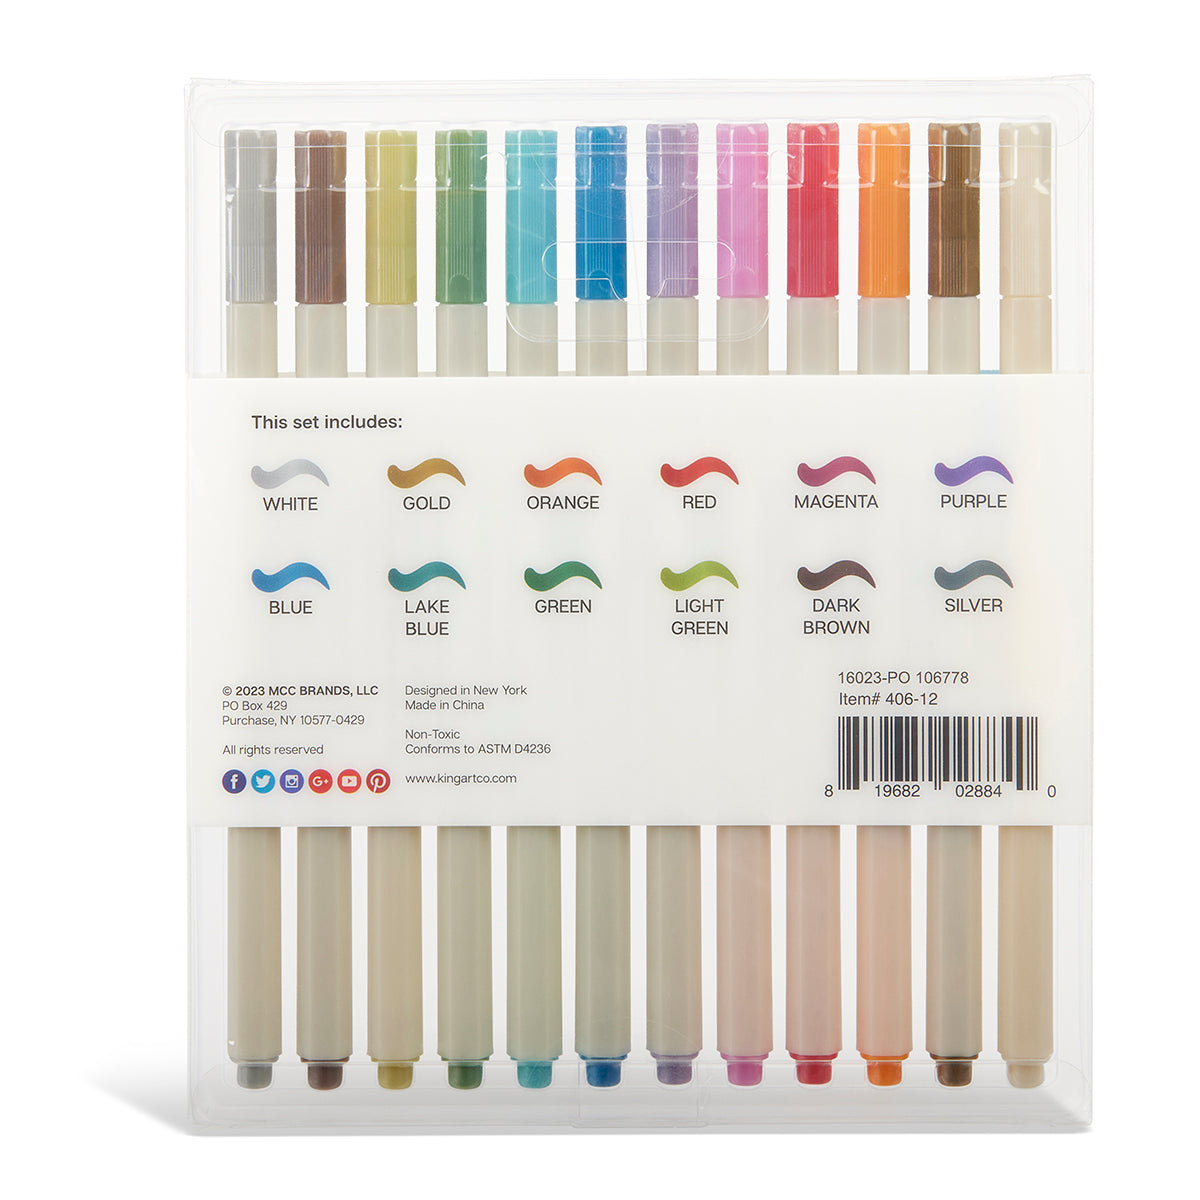 12 Colors Shimmer Marker Set,Doodle Dazzles Shimmer Marker Set,Outline  Markers Pens Shimmer Markers - Apply to Drawing, Card Making, Calligraphy